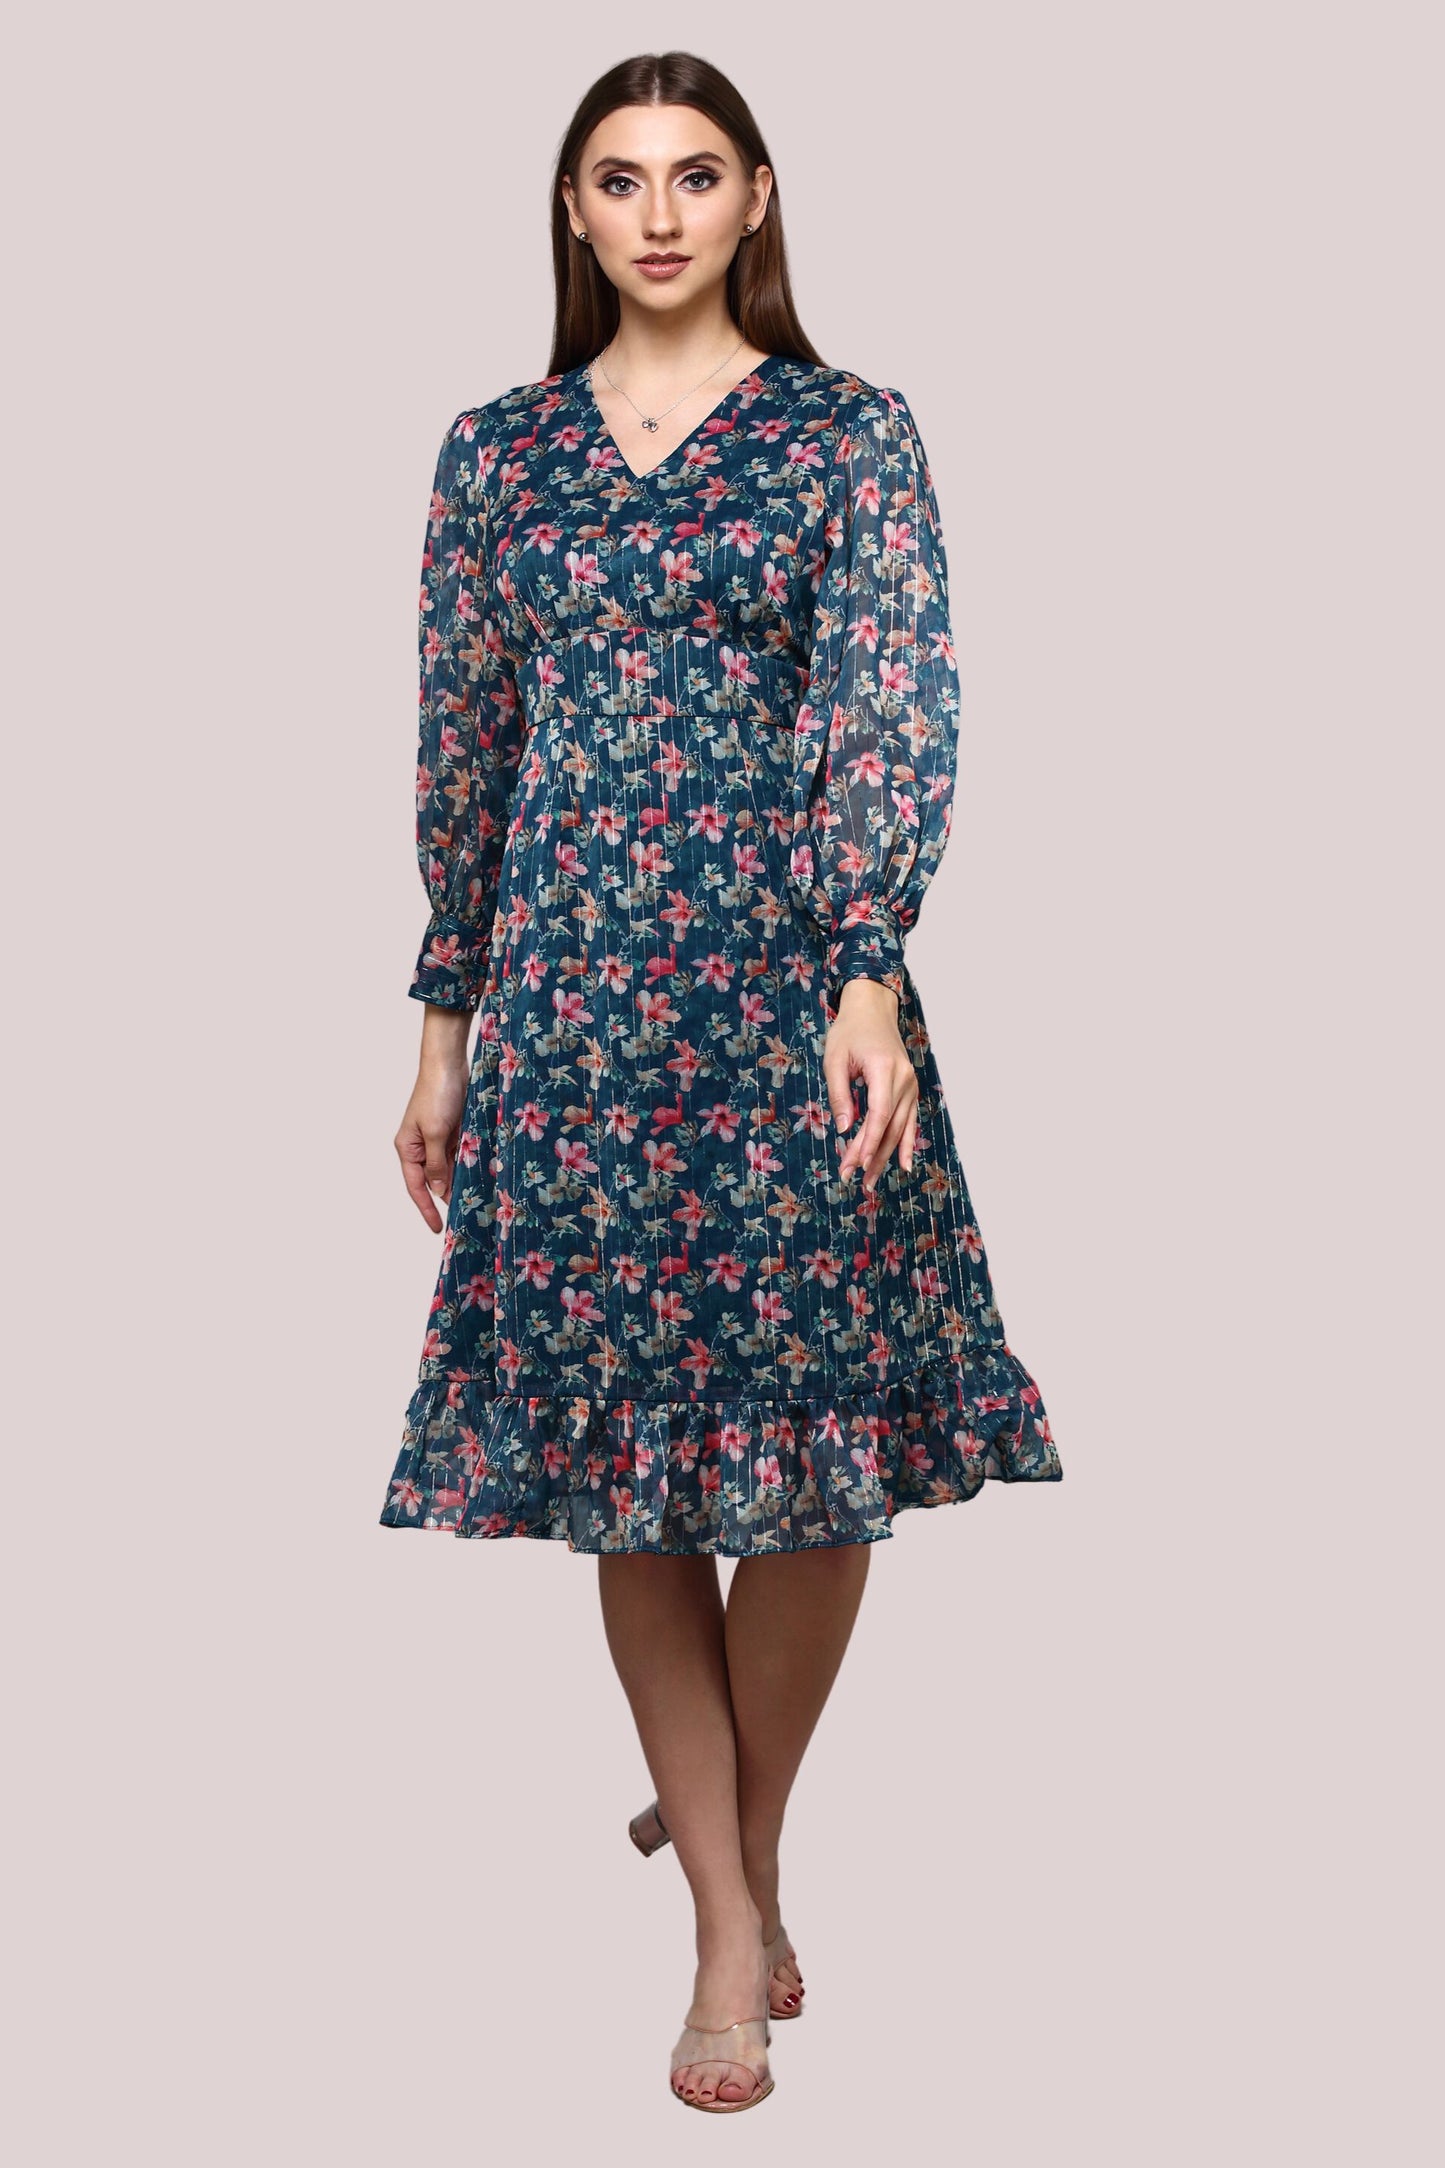 Floral printed dress with balloon sleeve